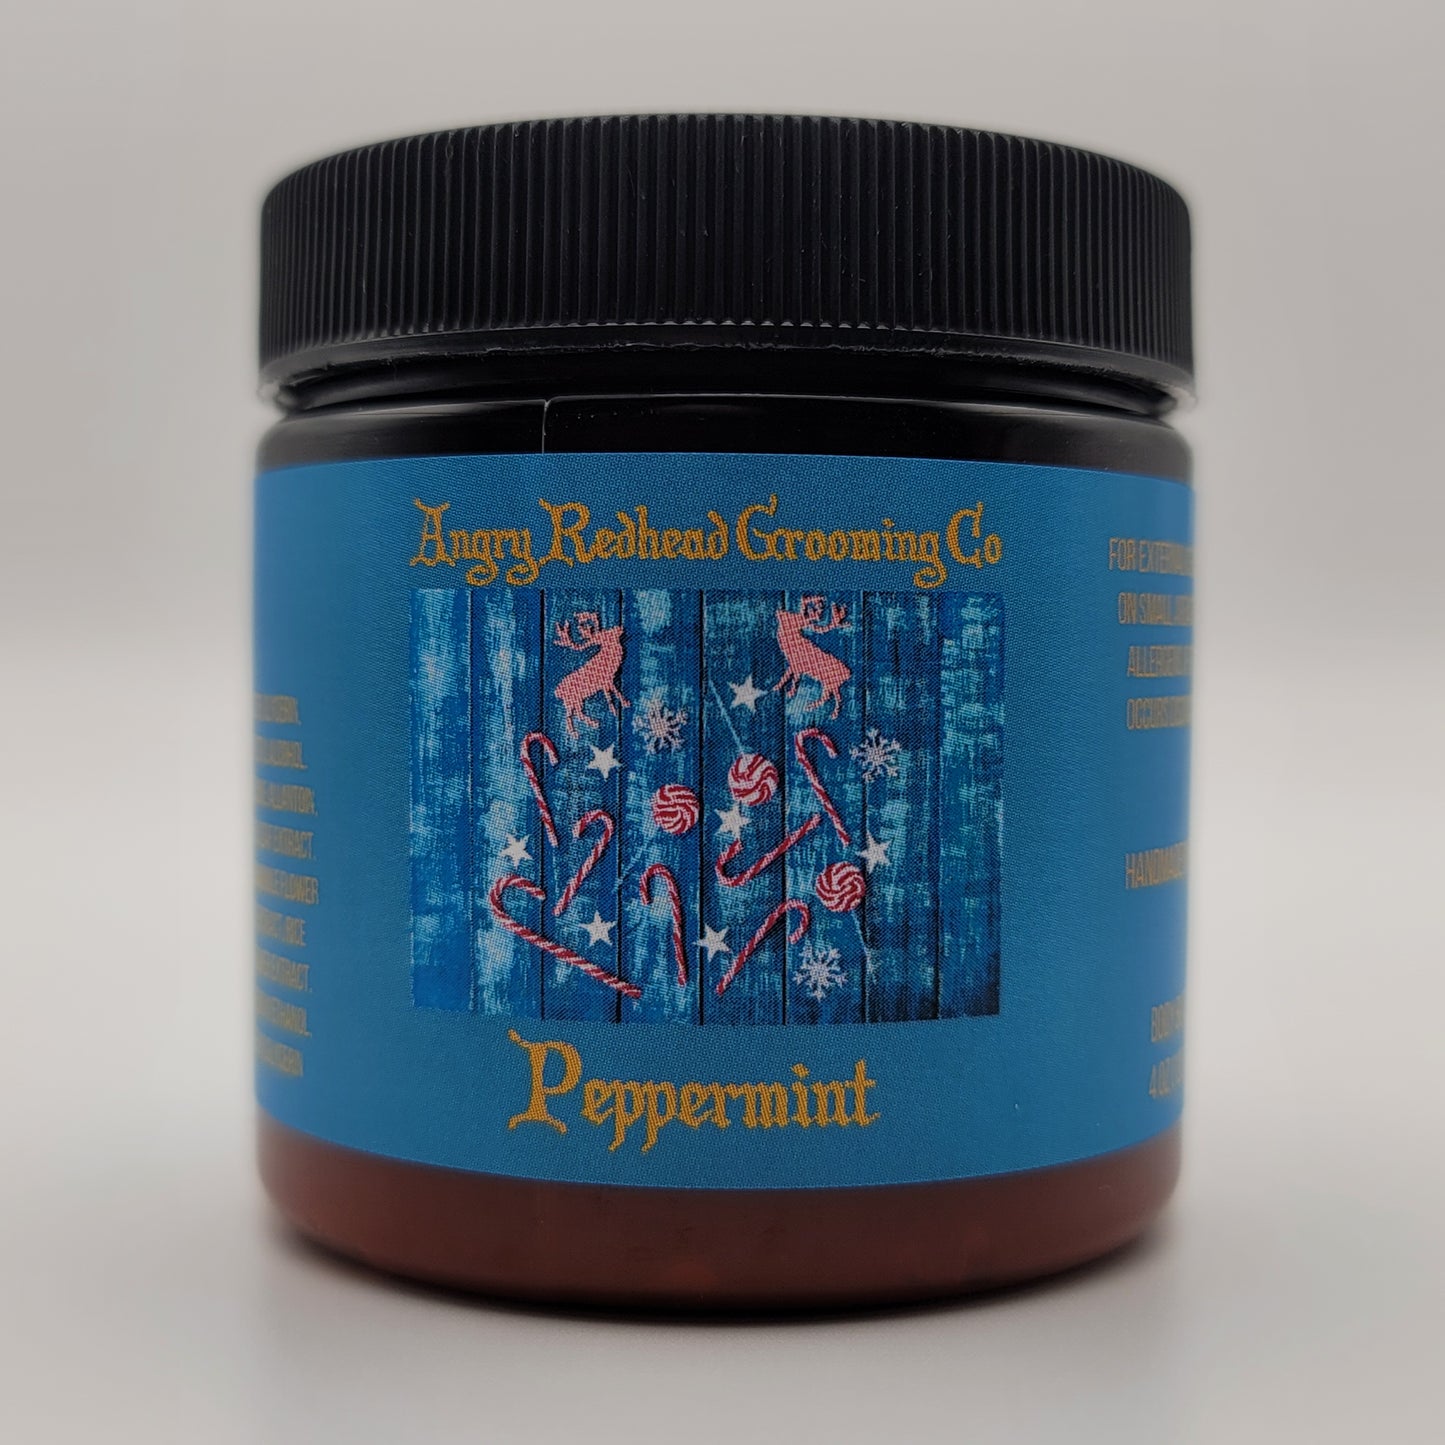 Peppermint Whipped Body Butter by Angry Redhead Grooming Co - angryredheadgrooming.com